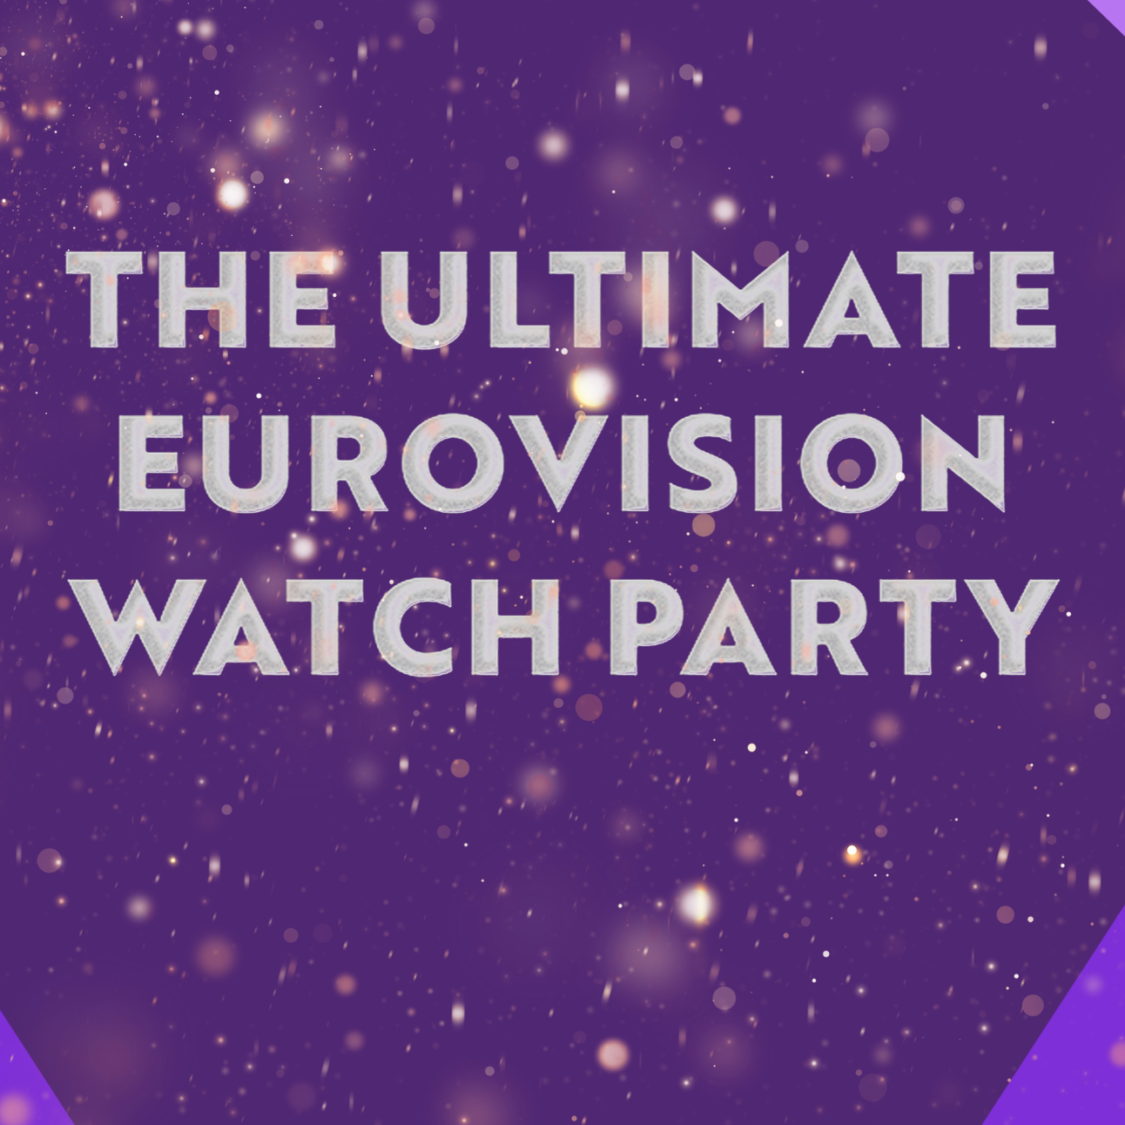 The Ultimate Eurovision Watch Party Nottingham Playhouse